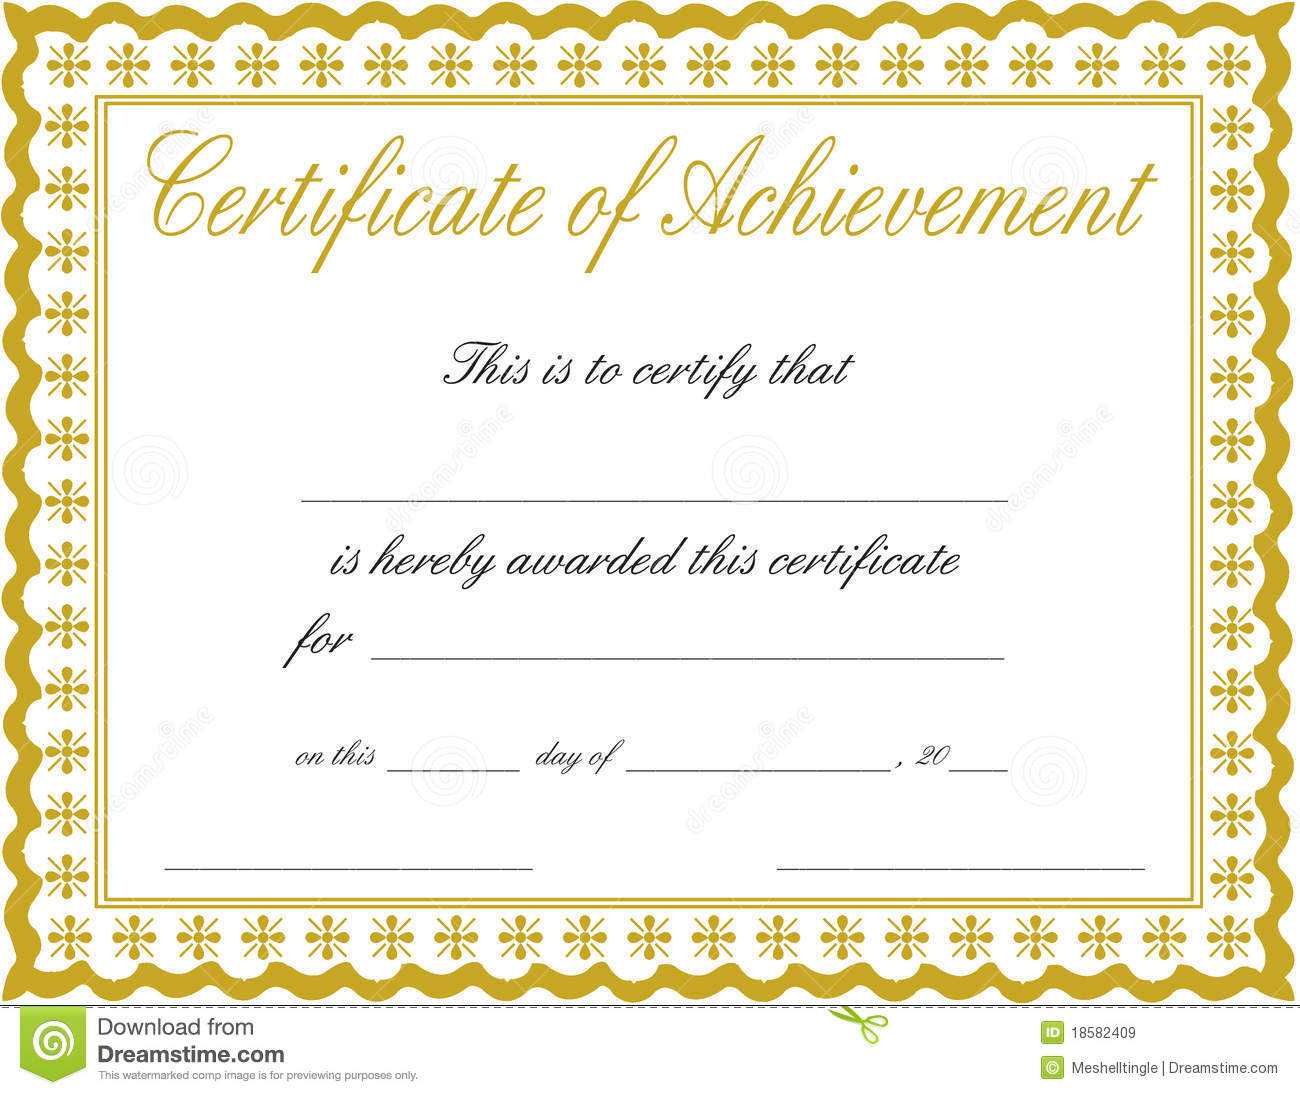 Free Printable Certificate Of Achievement Template | Mult Regarding Certificate Of Achievement Template For Kids